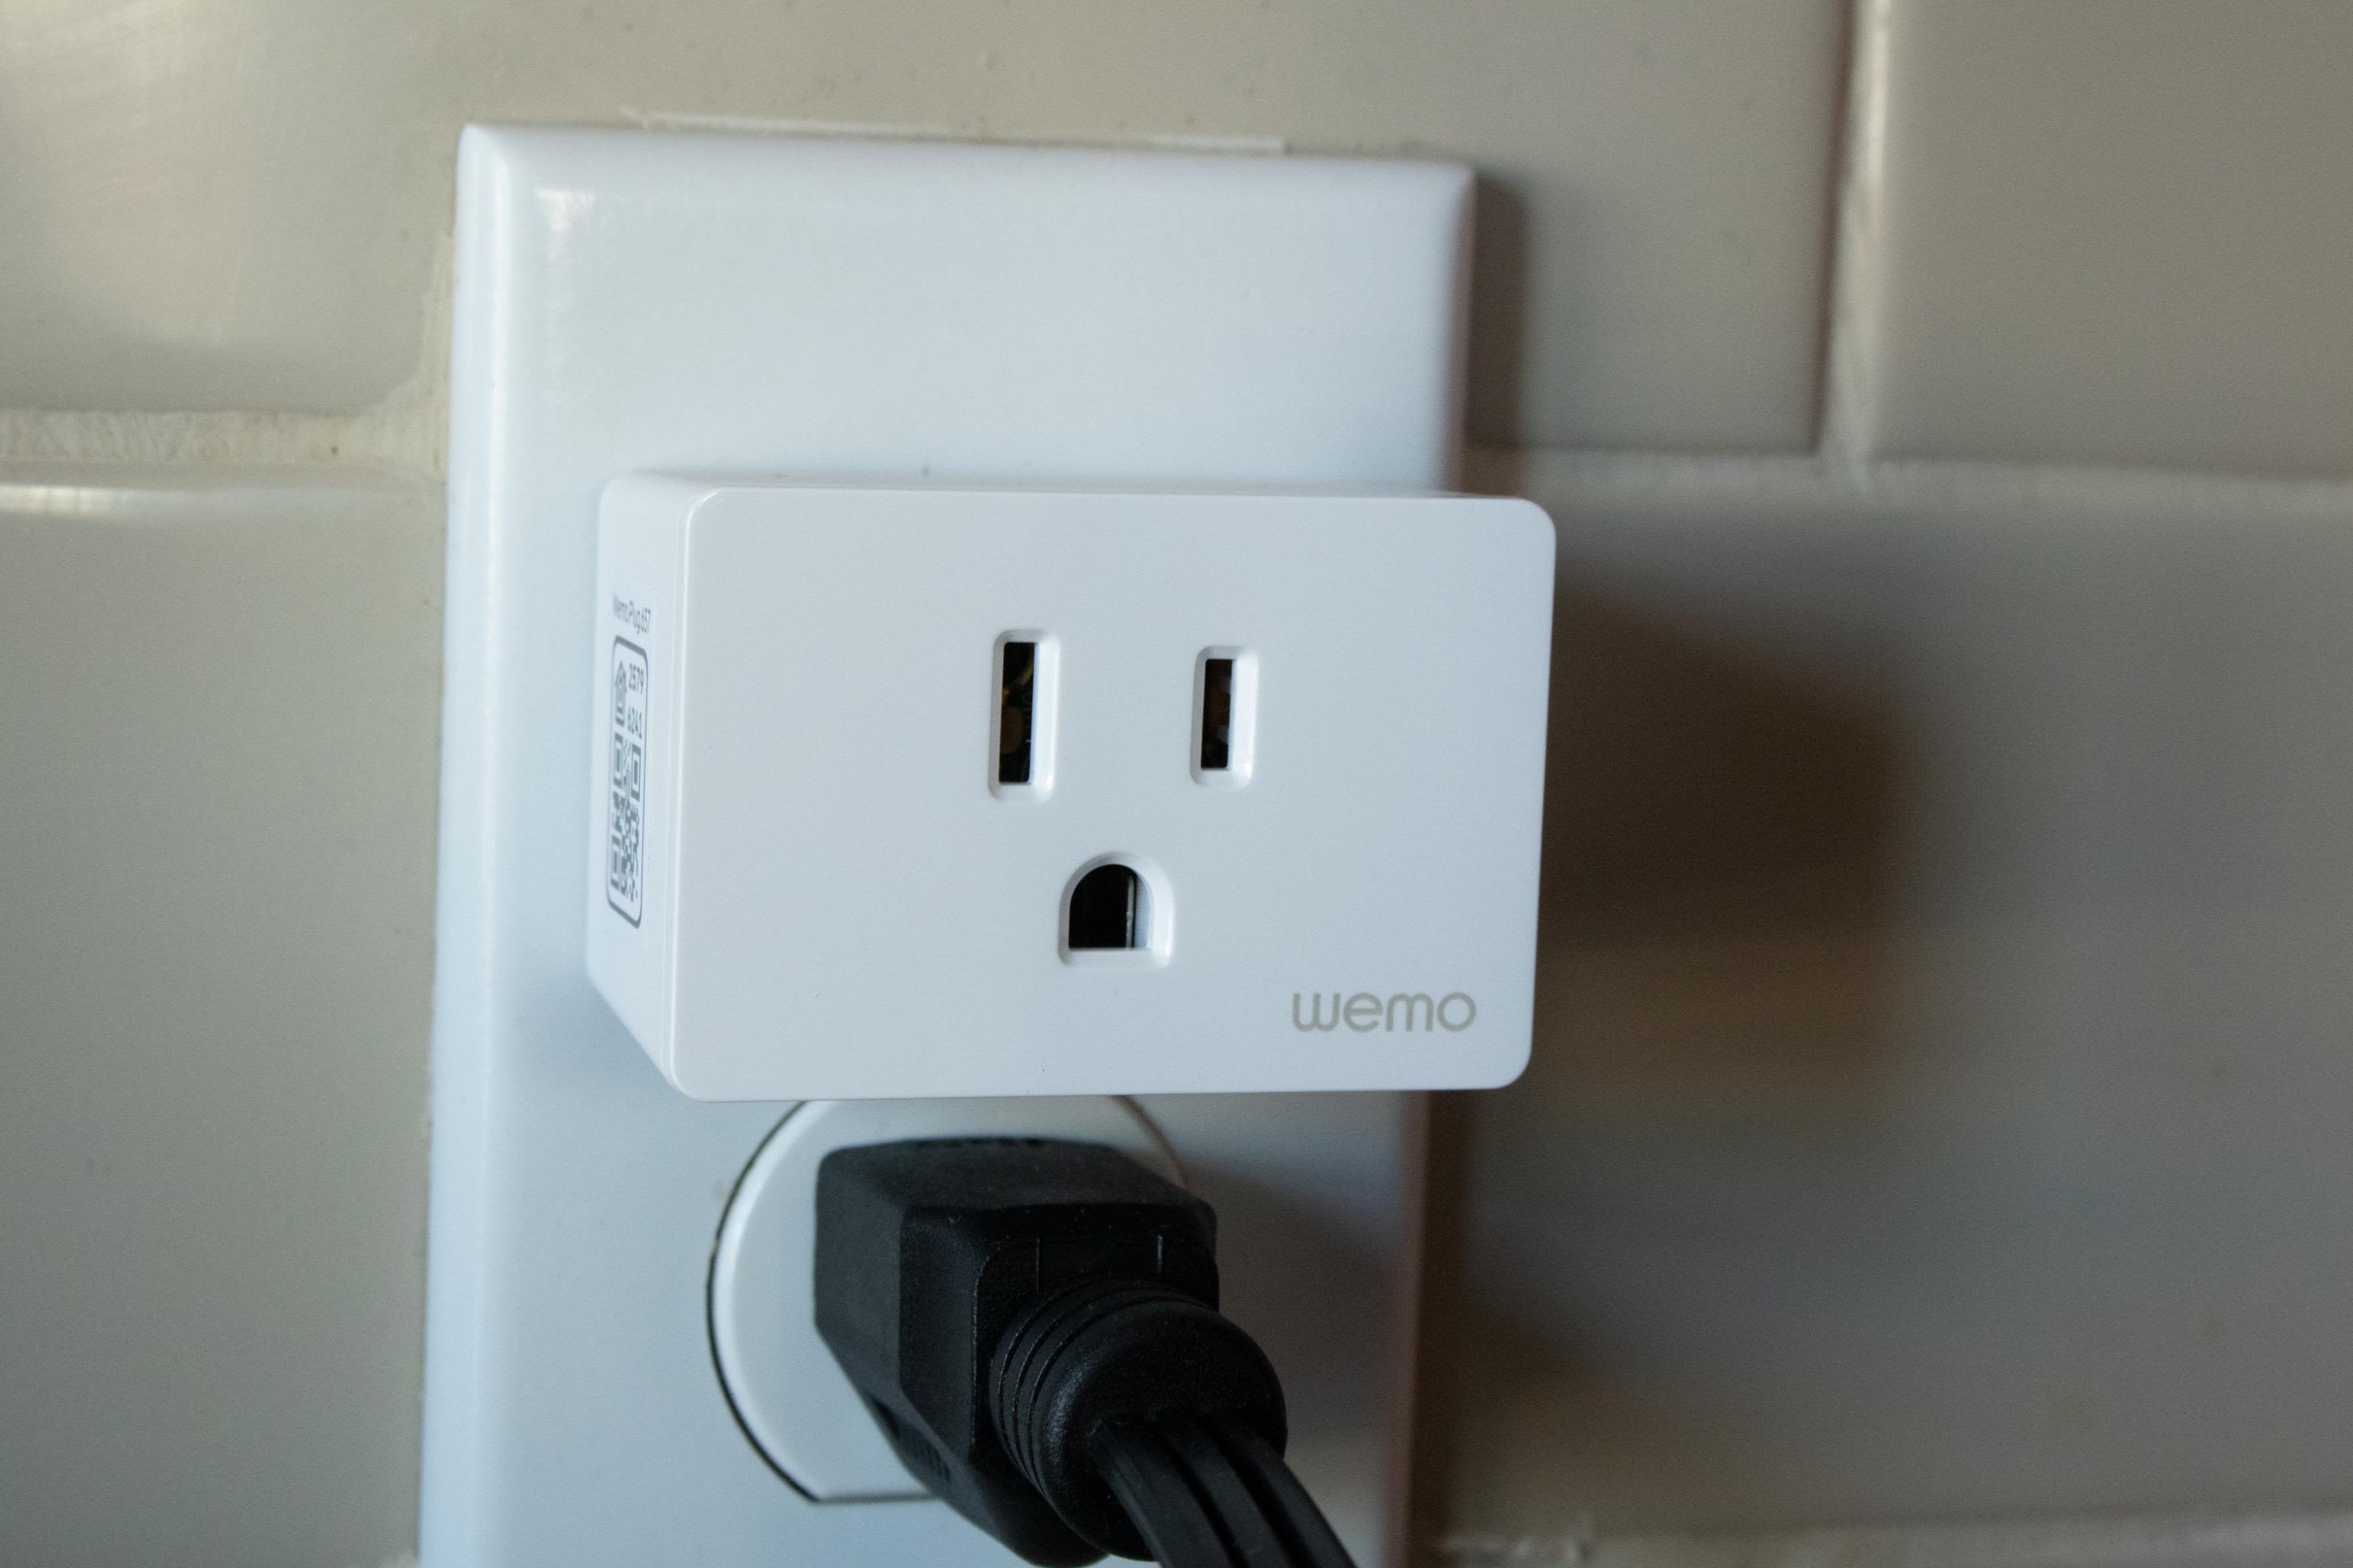 Belkin's Wemo Smart Plug Mini V2 has a security issue - The Verge